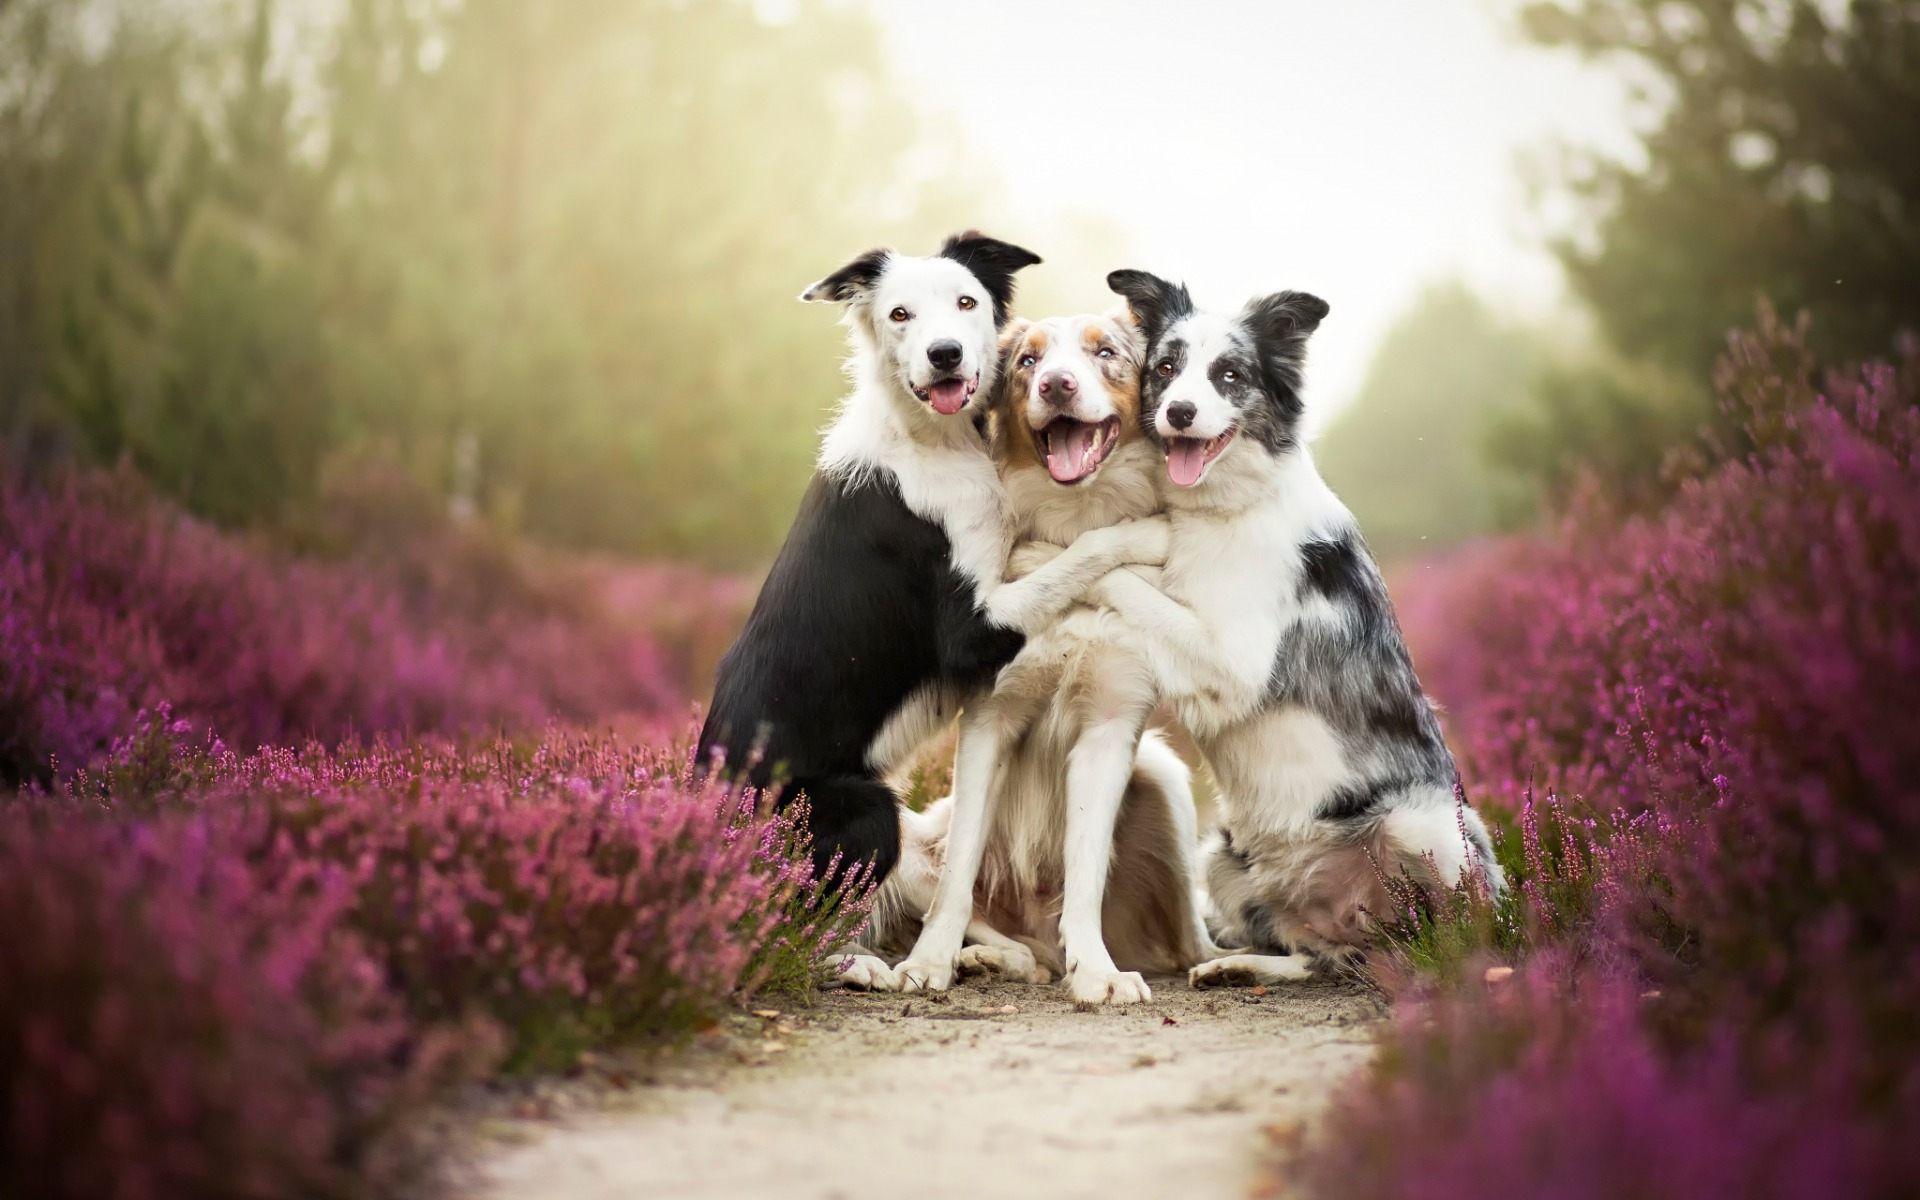 Two Dogs Wallpaper HD Download Of Cute Big Dogs